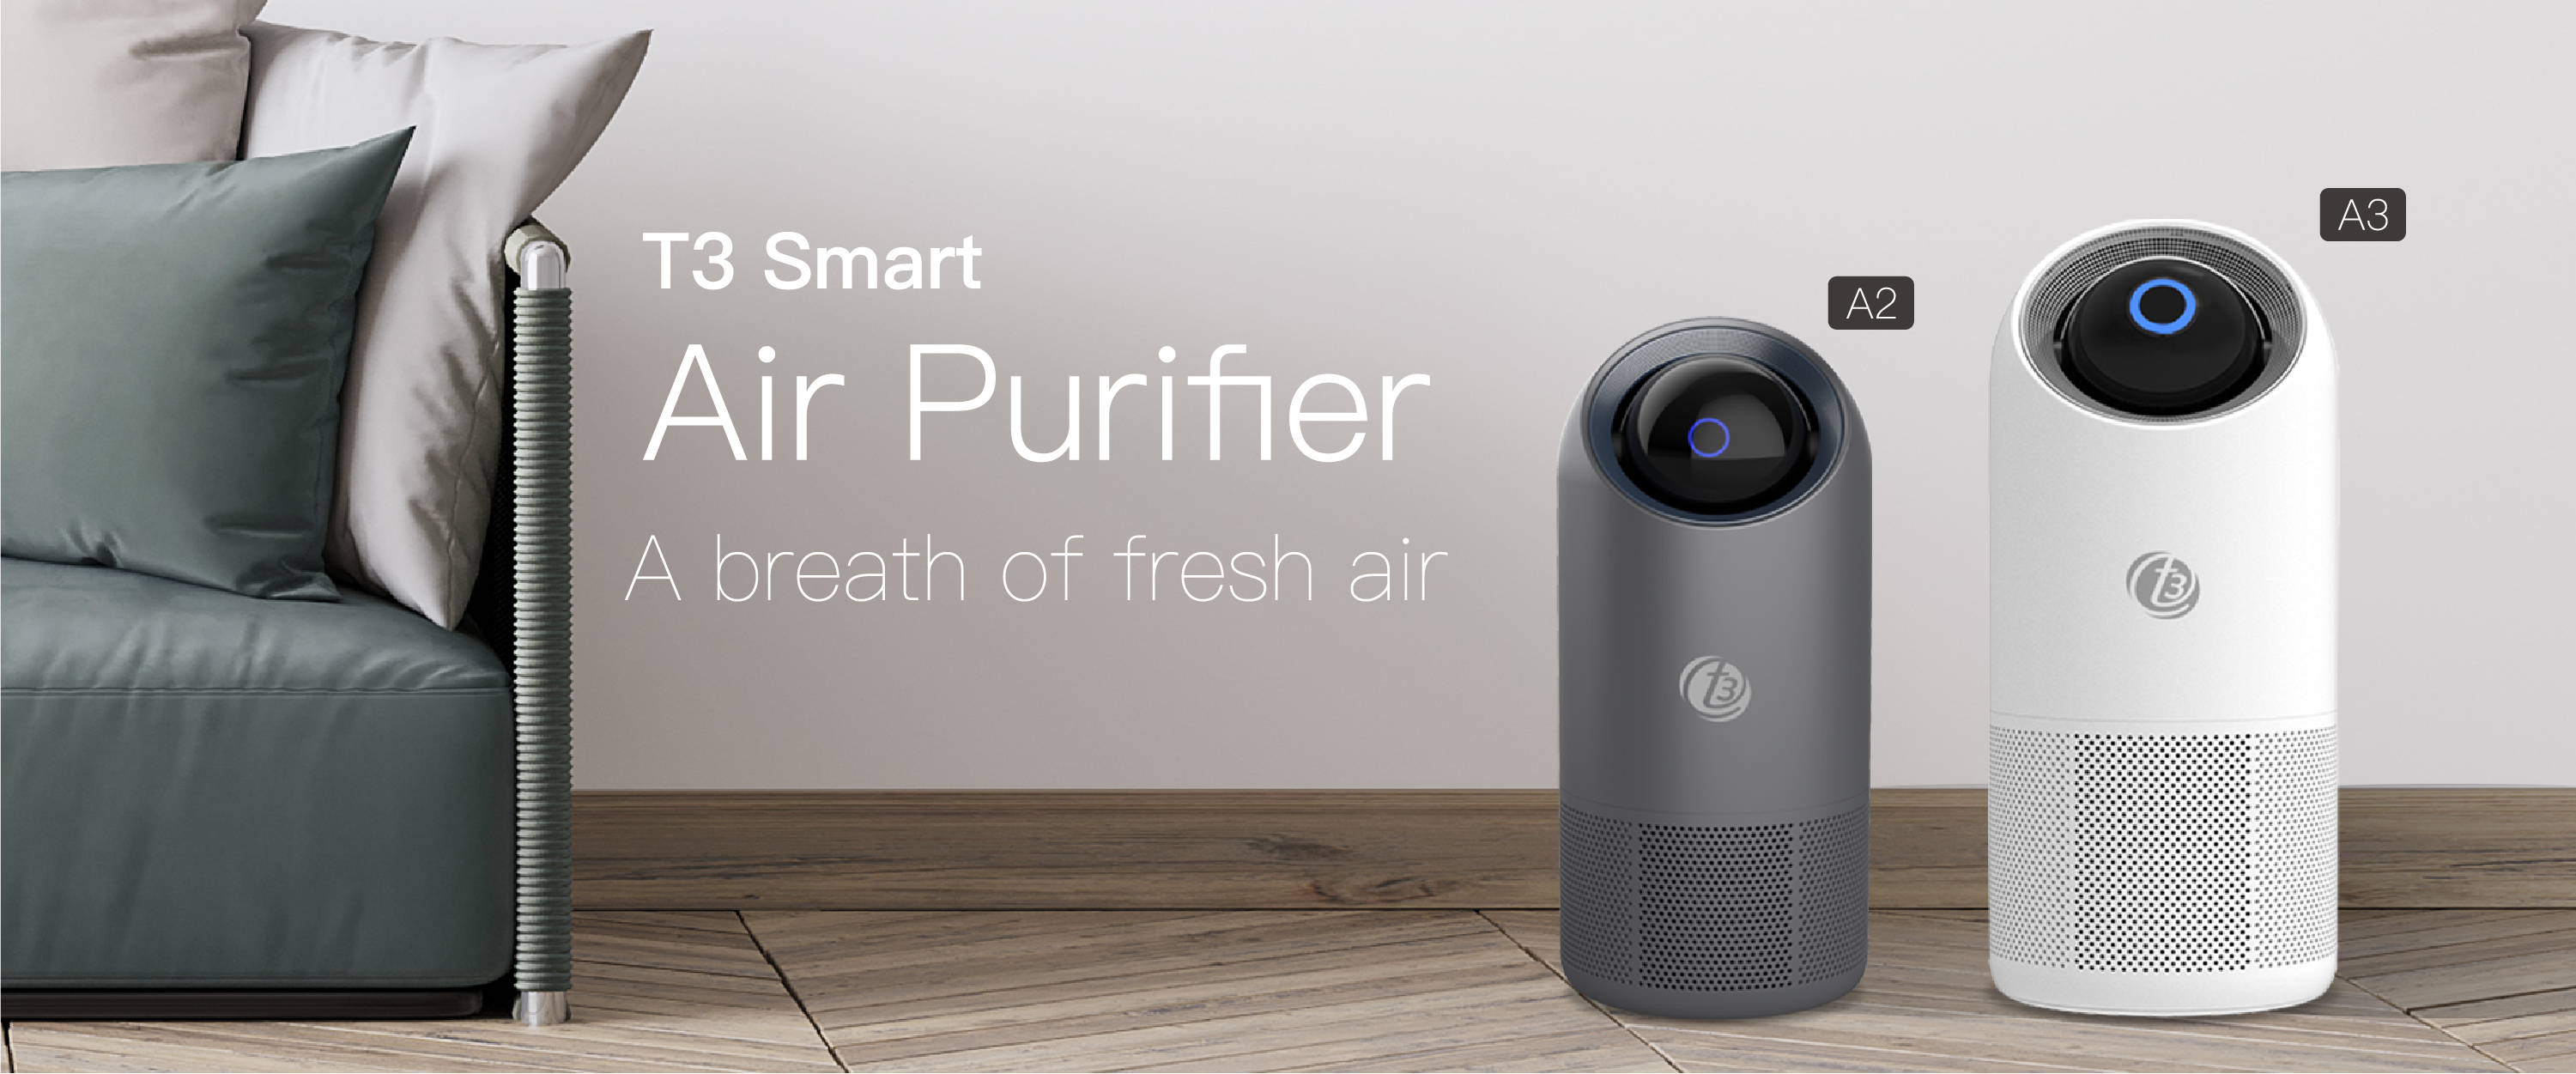 T3 Smart Air Purifier A2 and A3